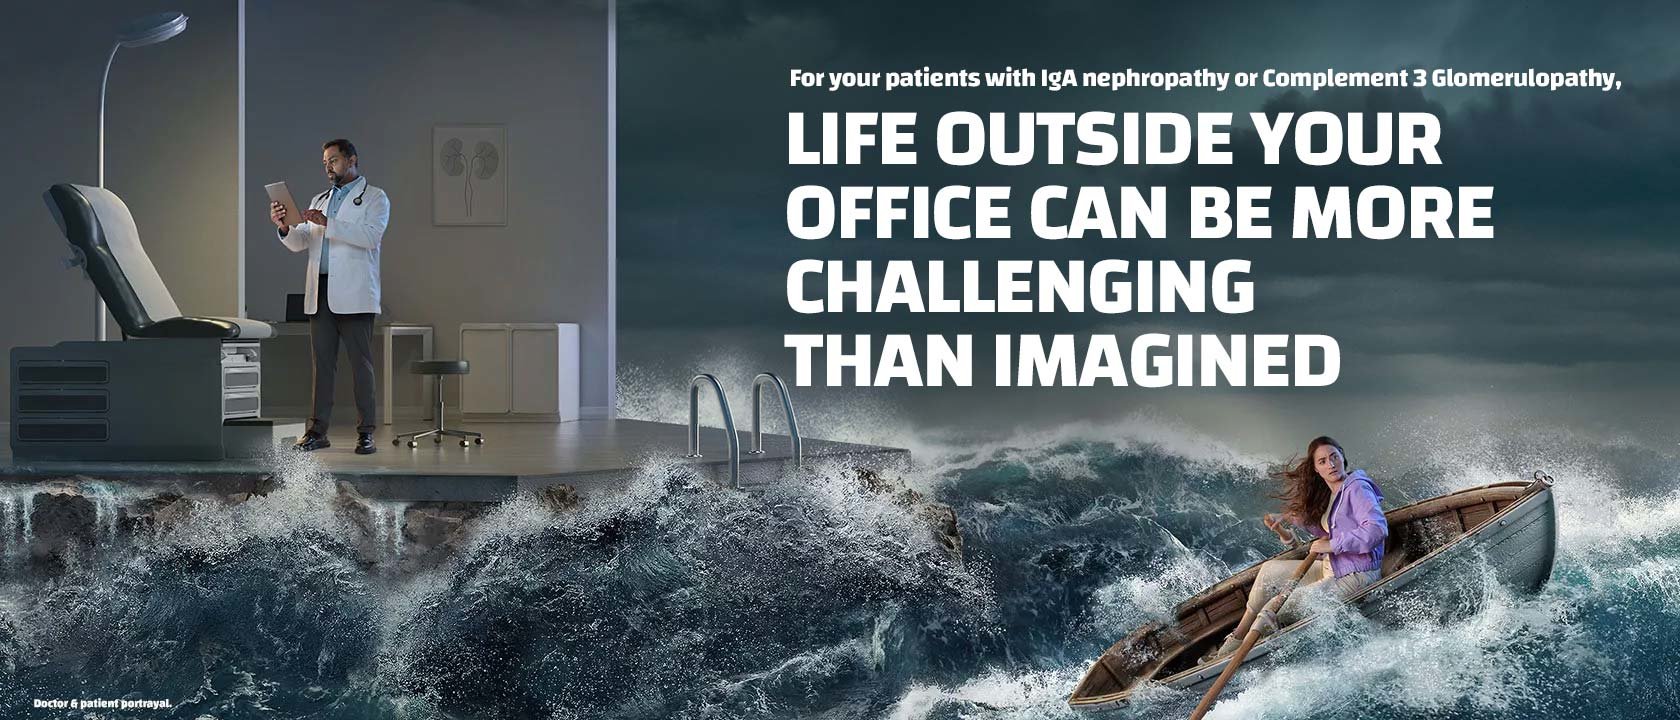 For your patients with IgA nephropathy or Complement 3 Glomerulopathy, life outside your office can be more challenging than imagined.